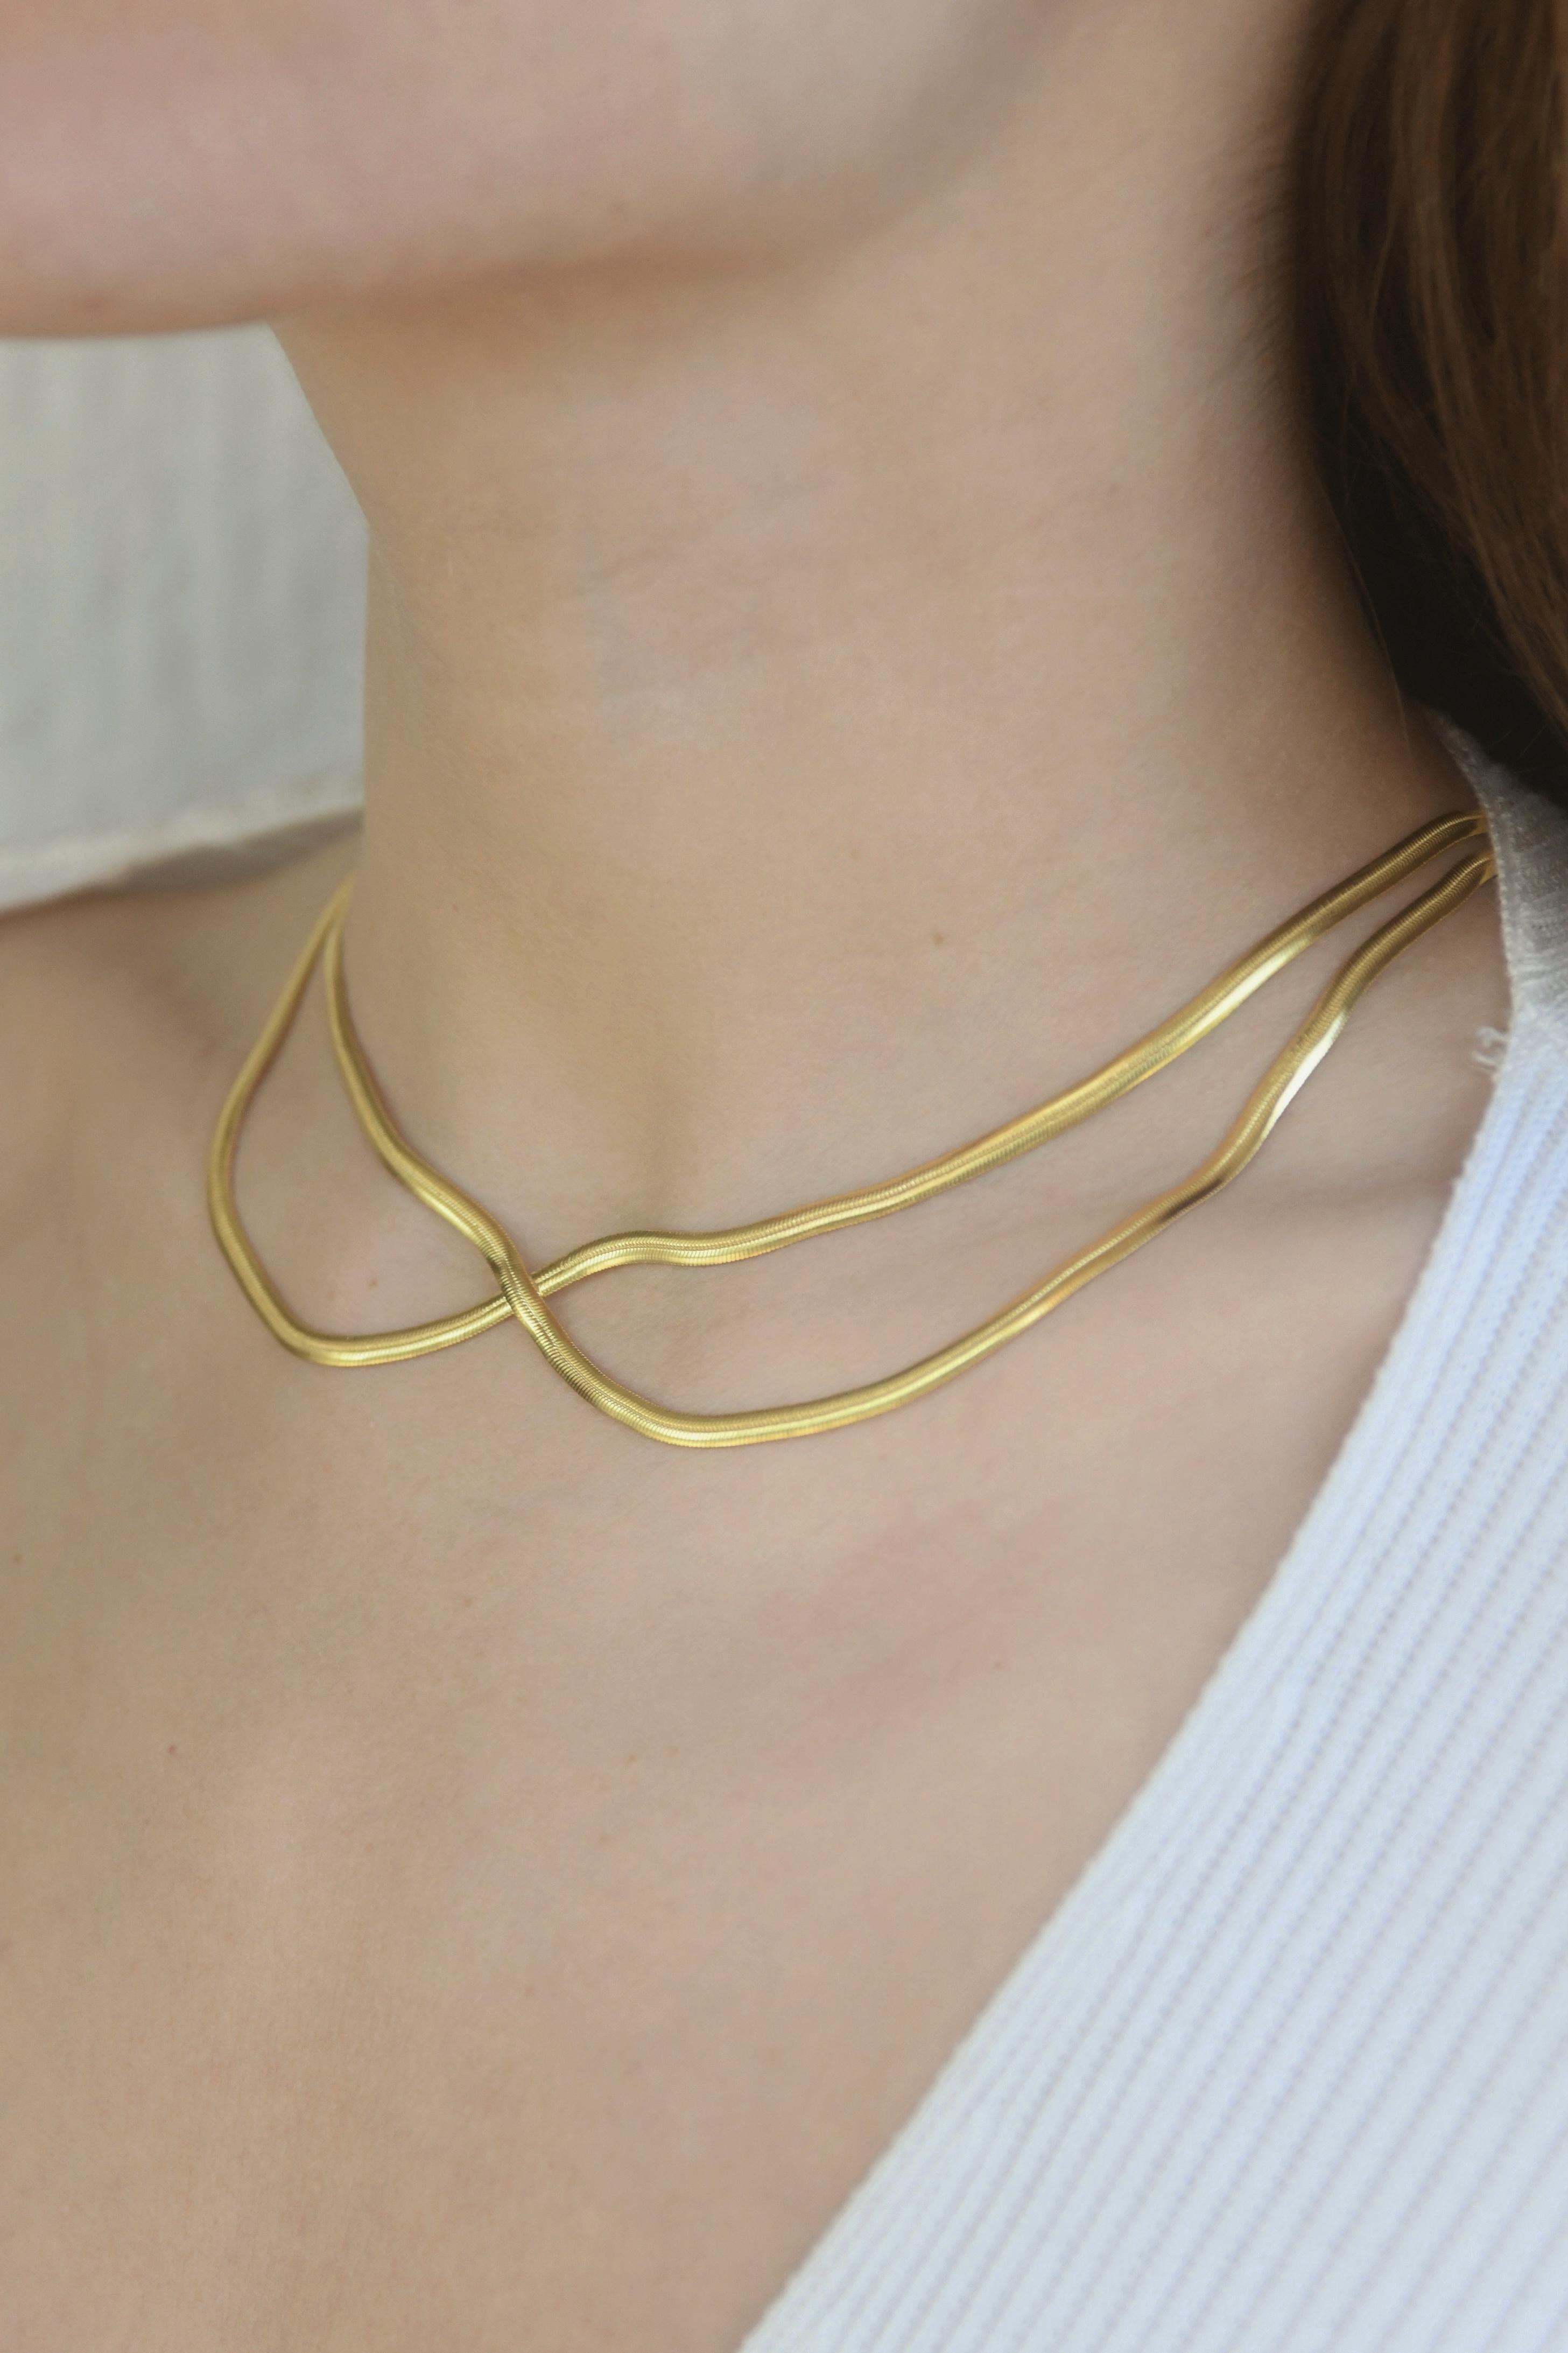 Necklace Slim Chain Liquid Minimal Snake Chain 18 Karat Gold-Plated Silver Greek In New Condition For Sale In Athens, GR